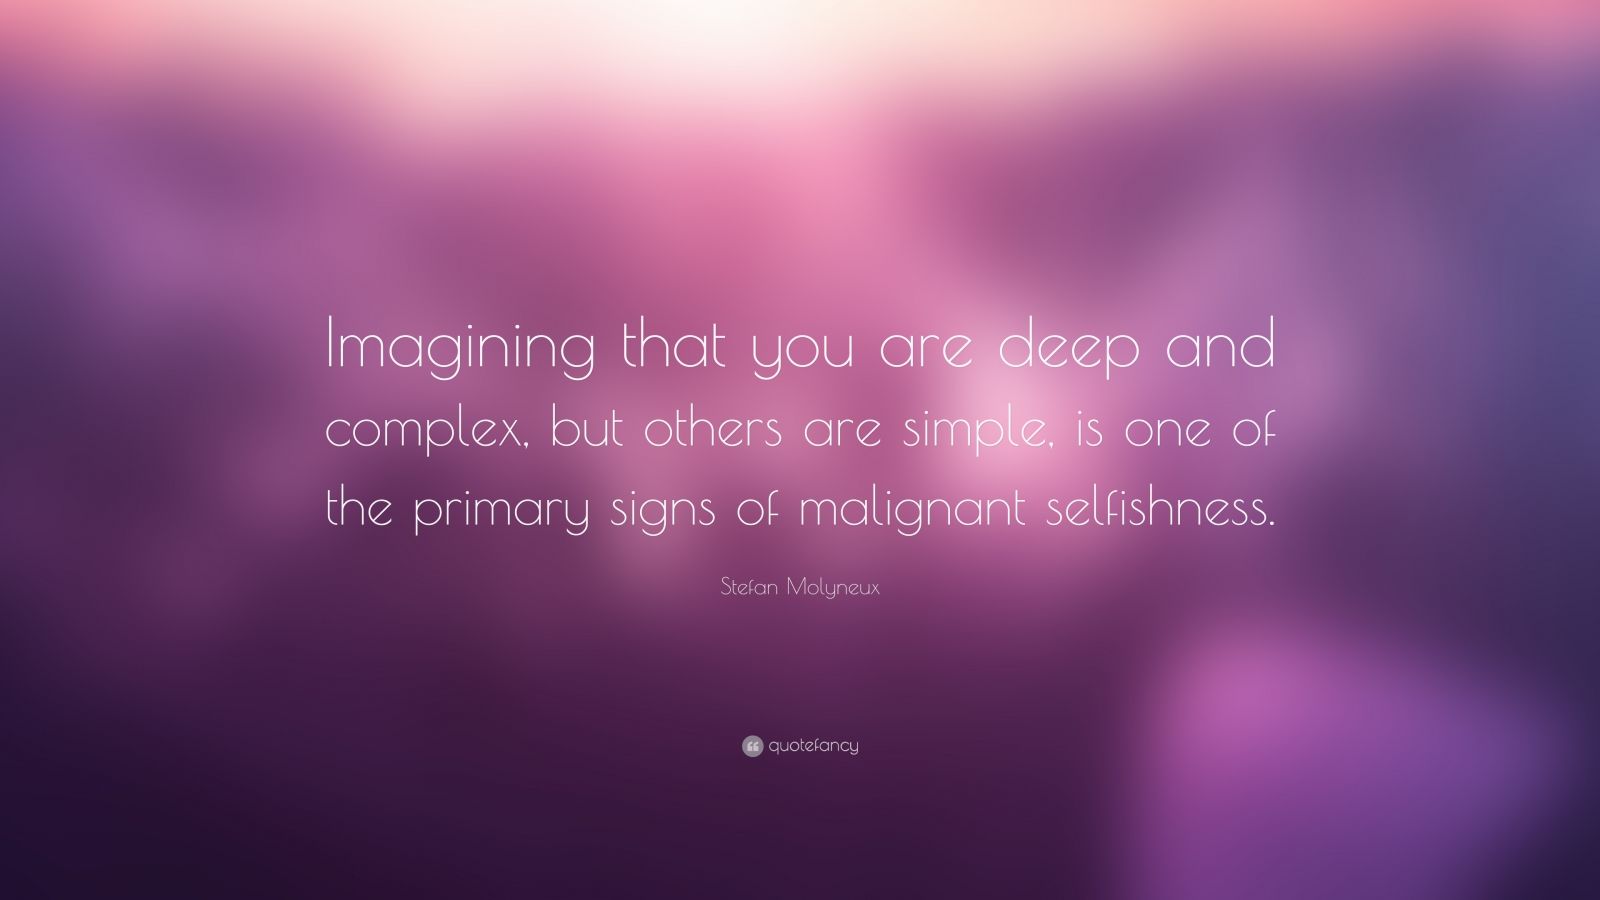 Stefan Molyneux Quote: "Imagining that you are deep and complex, but others are simple, is one ...